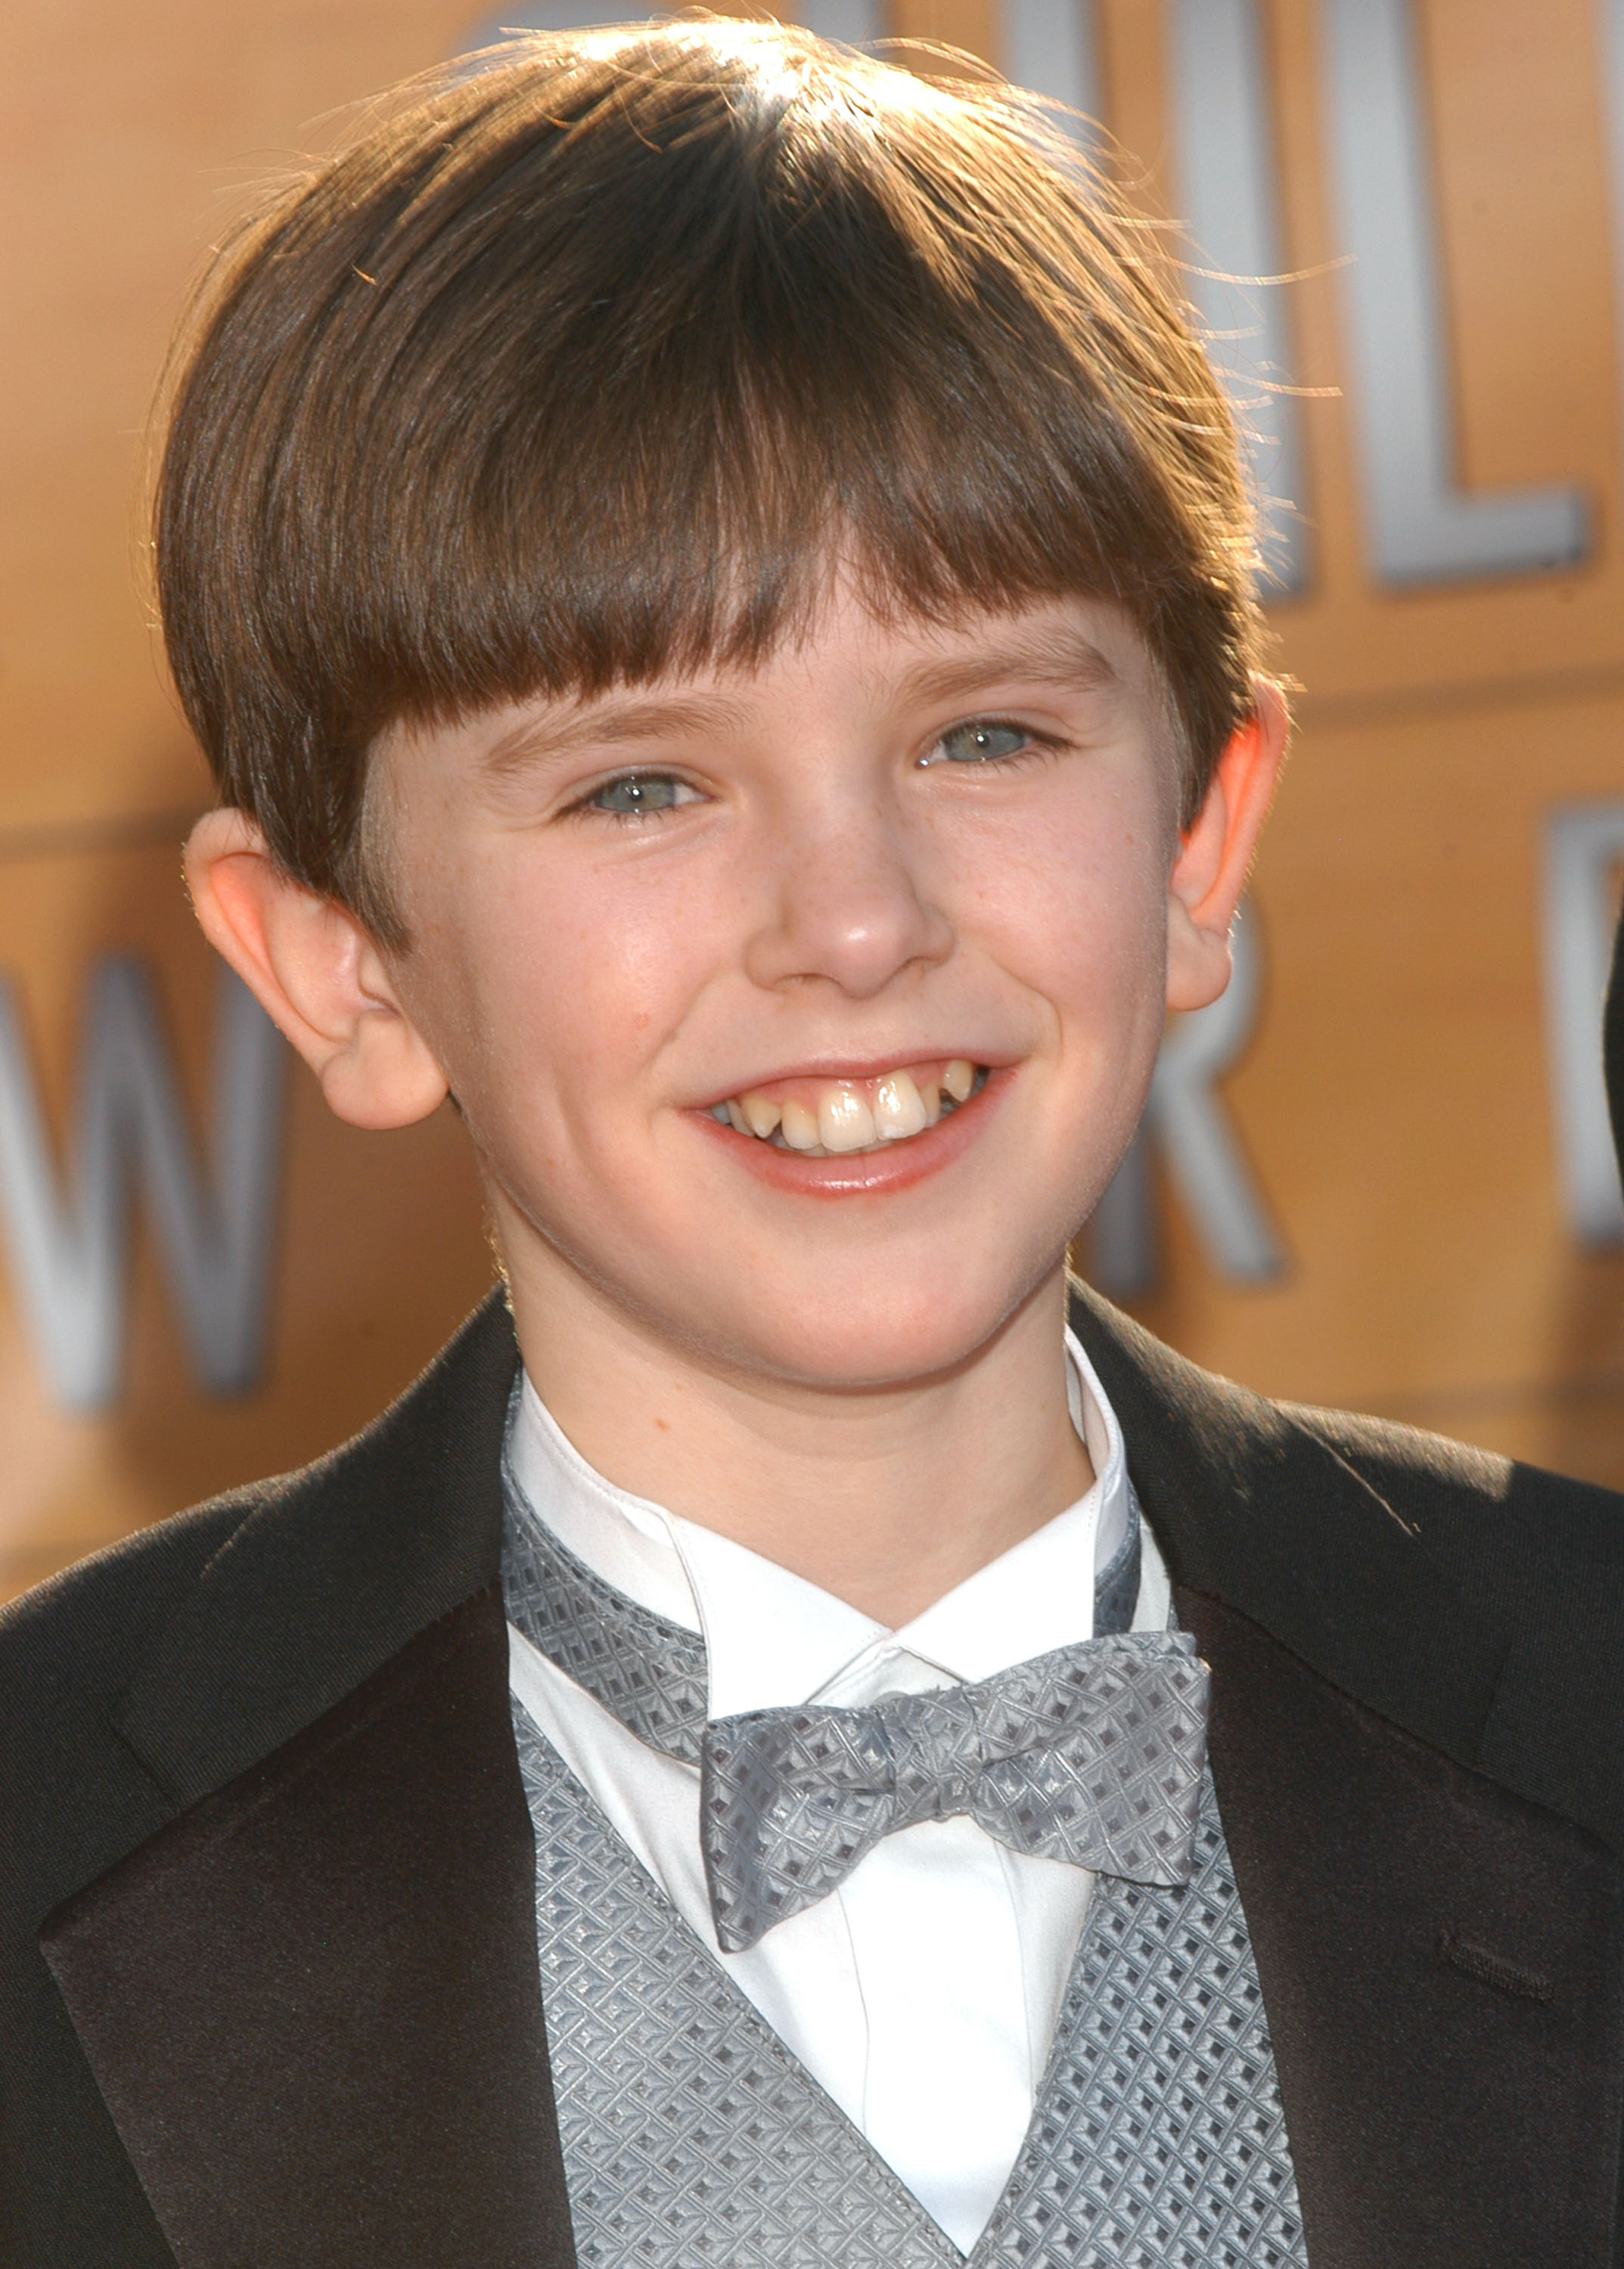 Freddie Highmore arrives at the 11th Annual Screen Actors Guild Awards in Los Angeles, California, on February 5, 2005. | Source: Getty Images